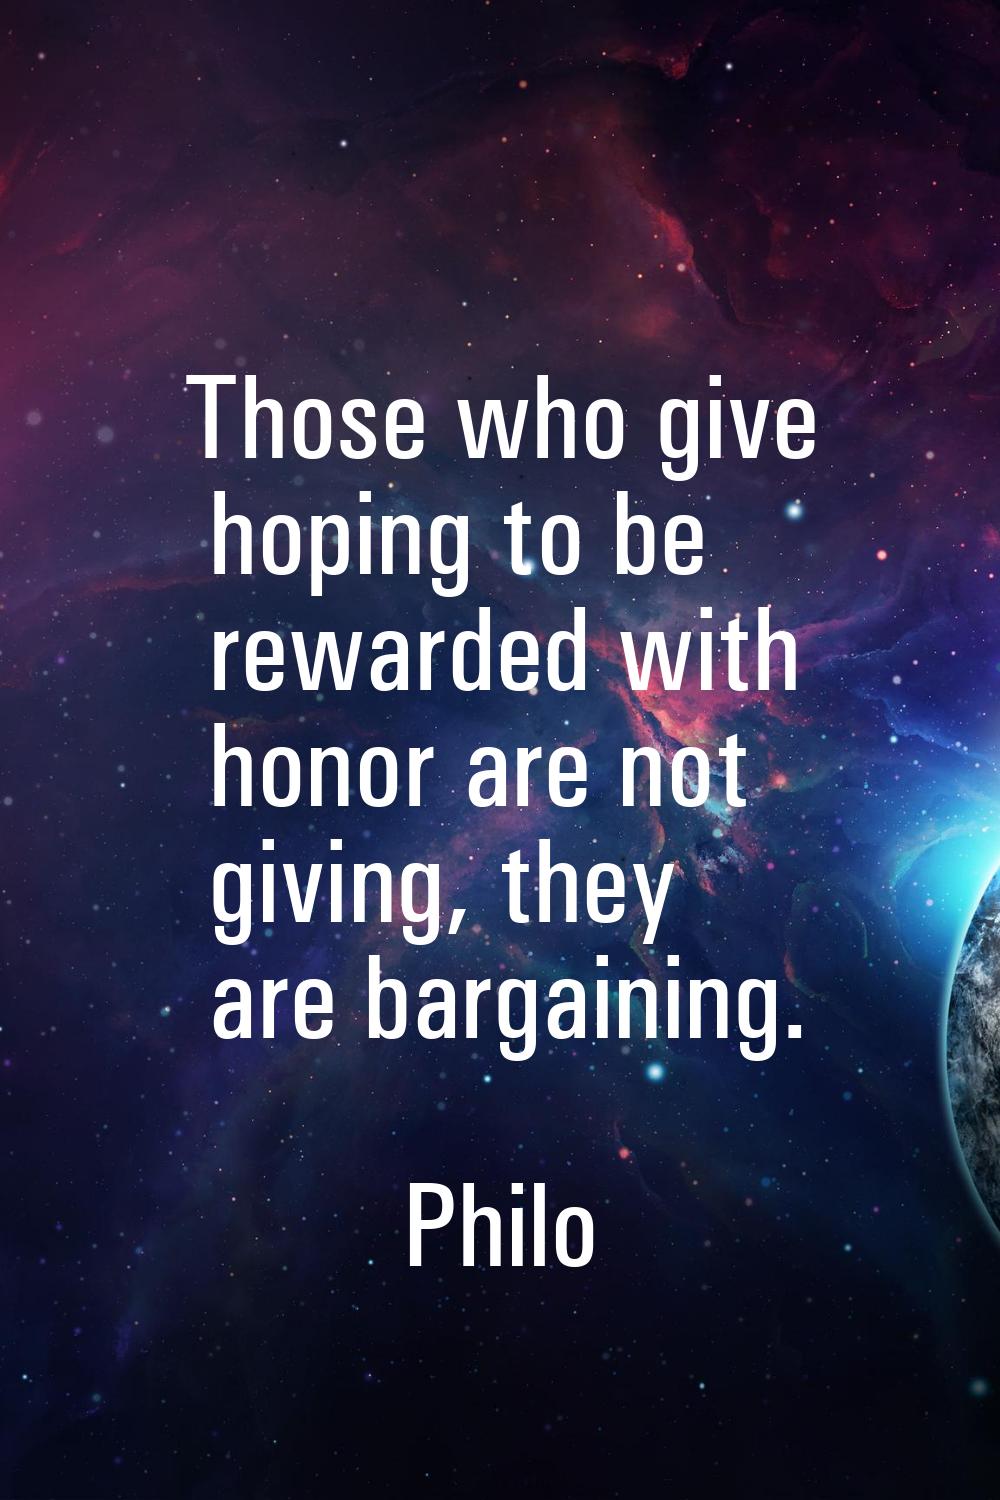 Those who give hoping to be rewarded with honor are not giving, they are bargaining.